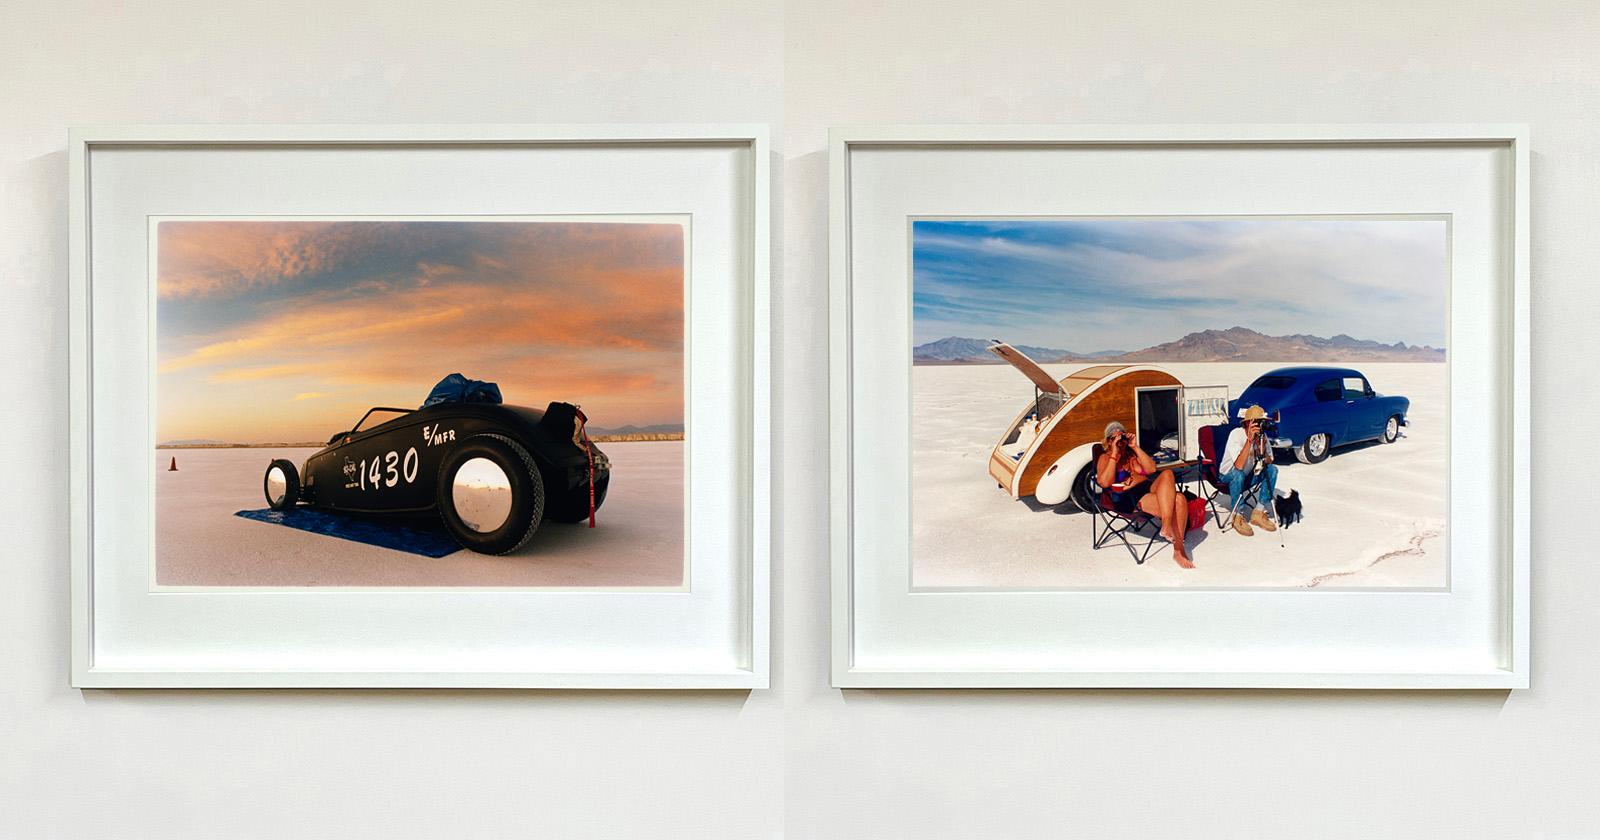 'Christine's '52 Henry J & teardrop' was captured in Bonneville Salt Flats, Utah, the iconic home of speed. This photograph captures the mountains in the distance meeting and contrasting with the flatness of the salt pan, whilst a pair of retro